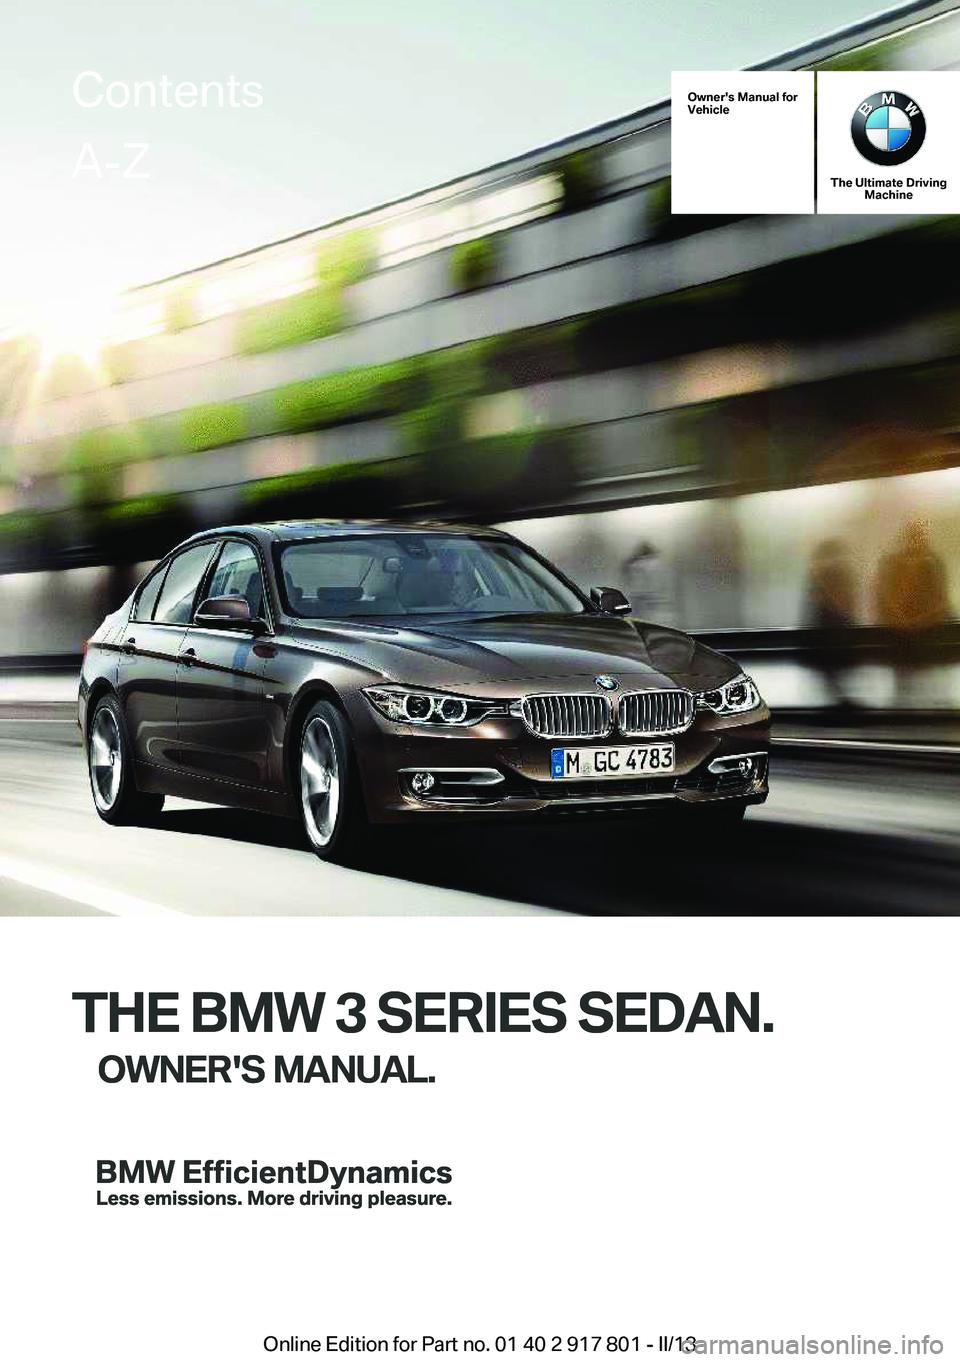 BMW 328I 2013  Owners Manual Owner's Manual for
Vehicle
THE BMW 3 SERIES SEDAN.
OWNER'S MANUAL.
The Ultimate Driving Machine
THE BMW 3 SERIES SEDAN.
OWNER'S MANUAL.
ContentsA-Z
Online Edition for Part no. 01 40 2 917 